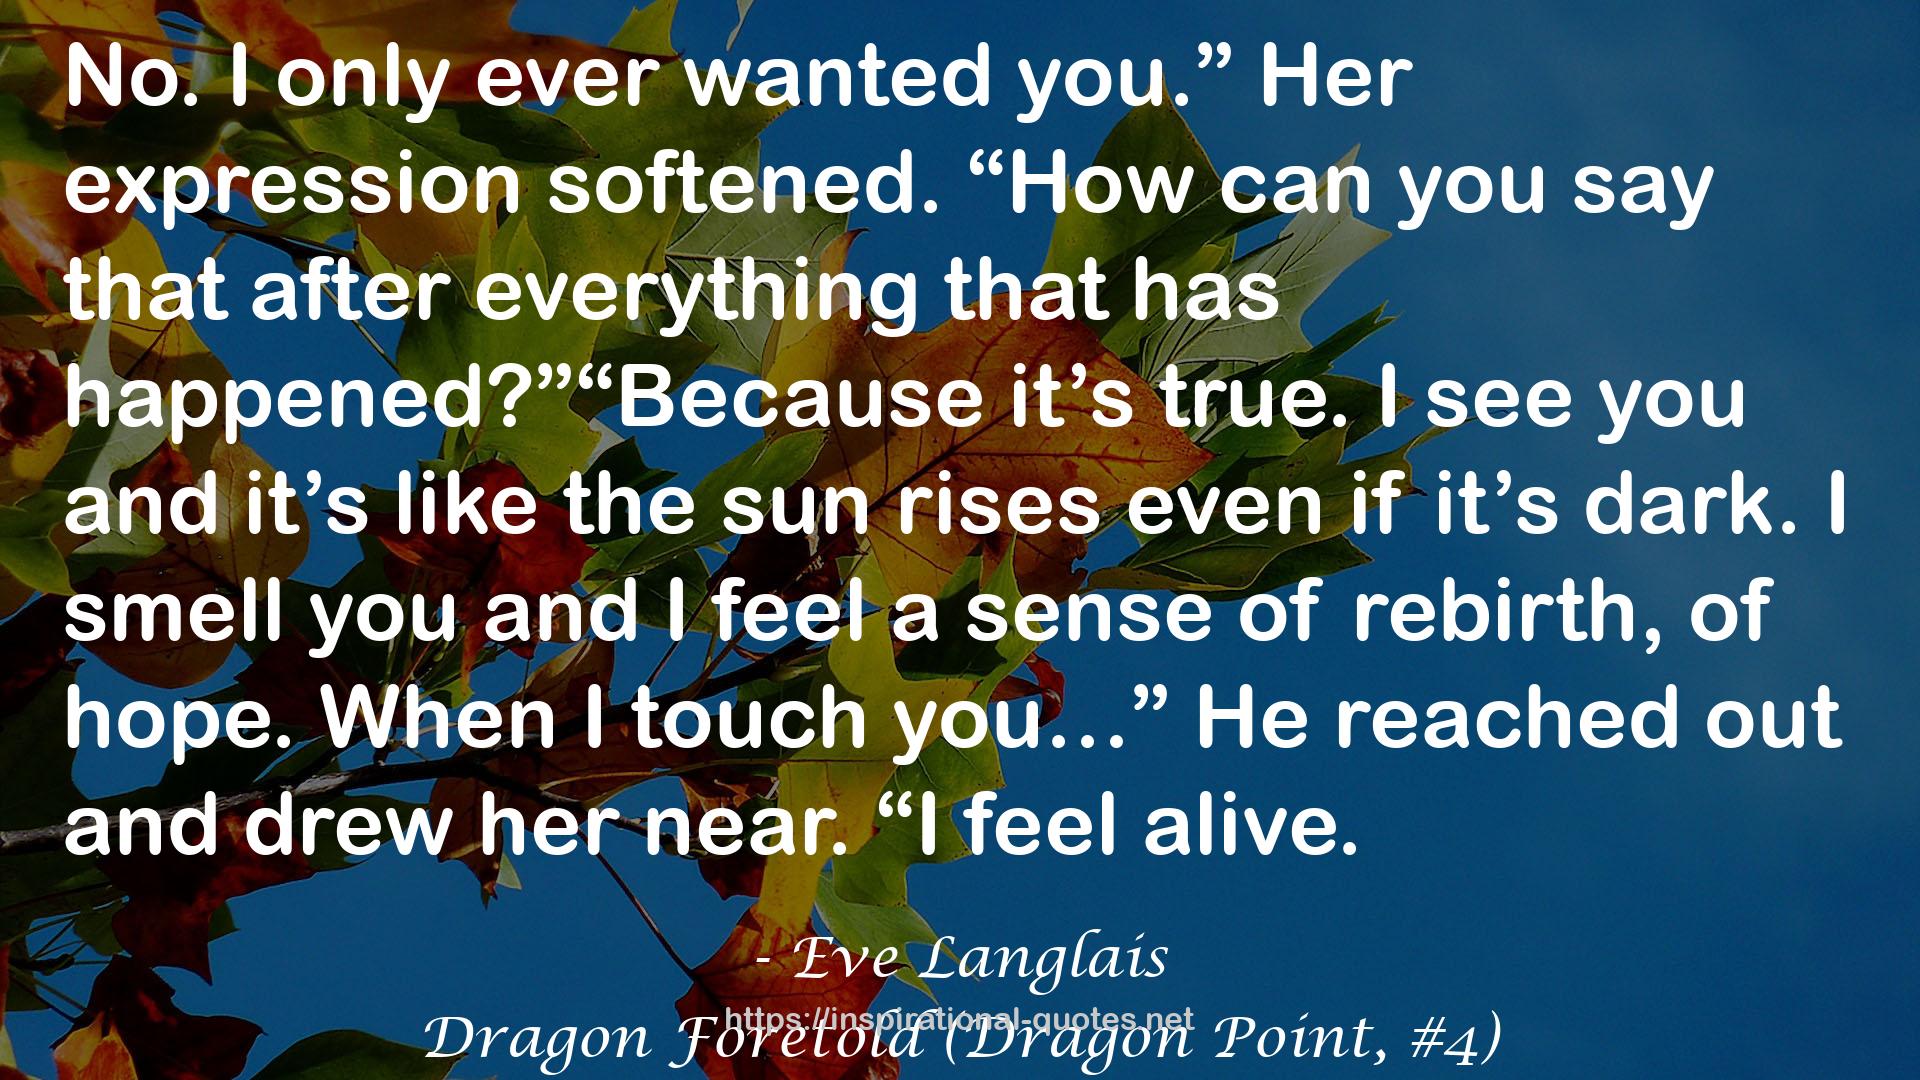 Dragon Foretold (Dragon Point, #4) QUOTES